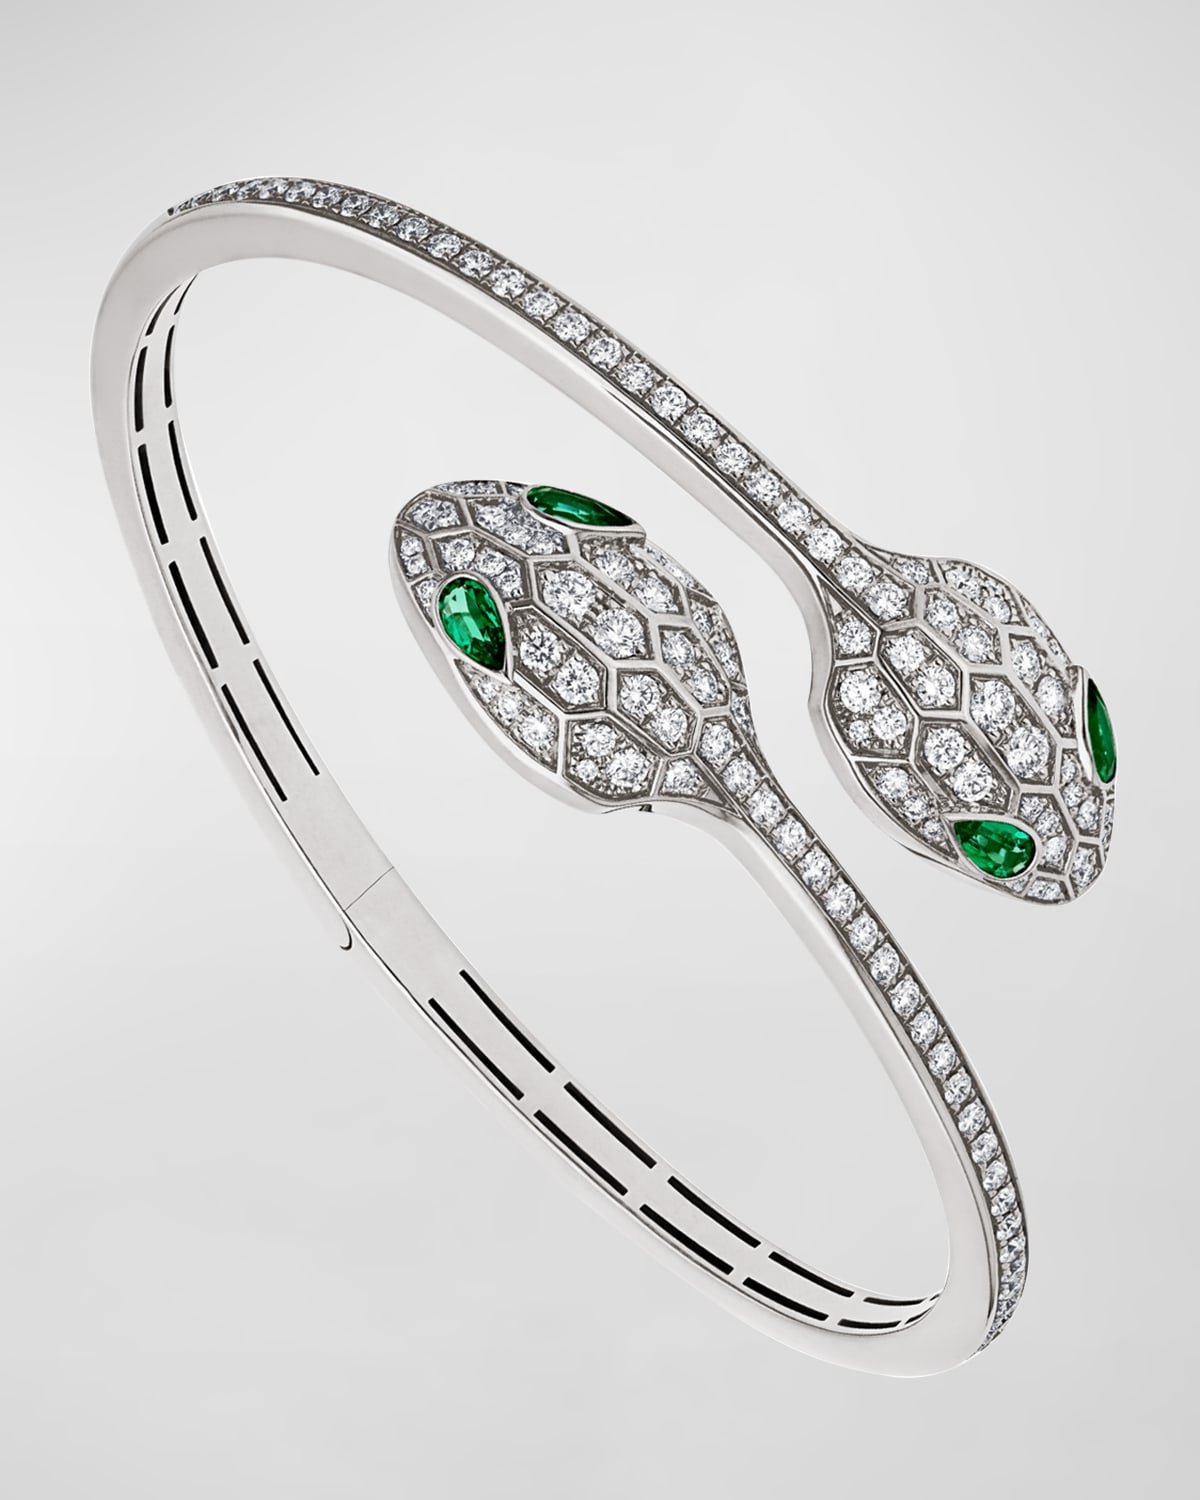 Serpenti Bypass Bracelet in 18k White Gold and Diamonds, Size L